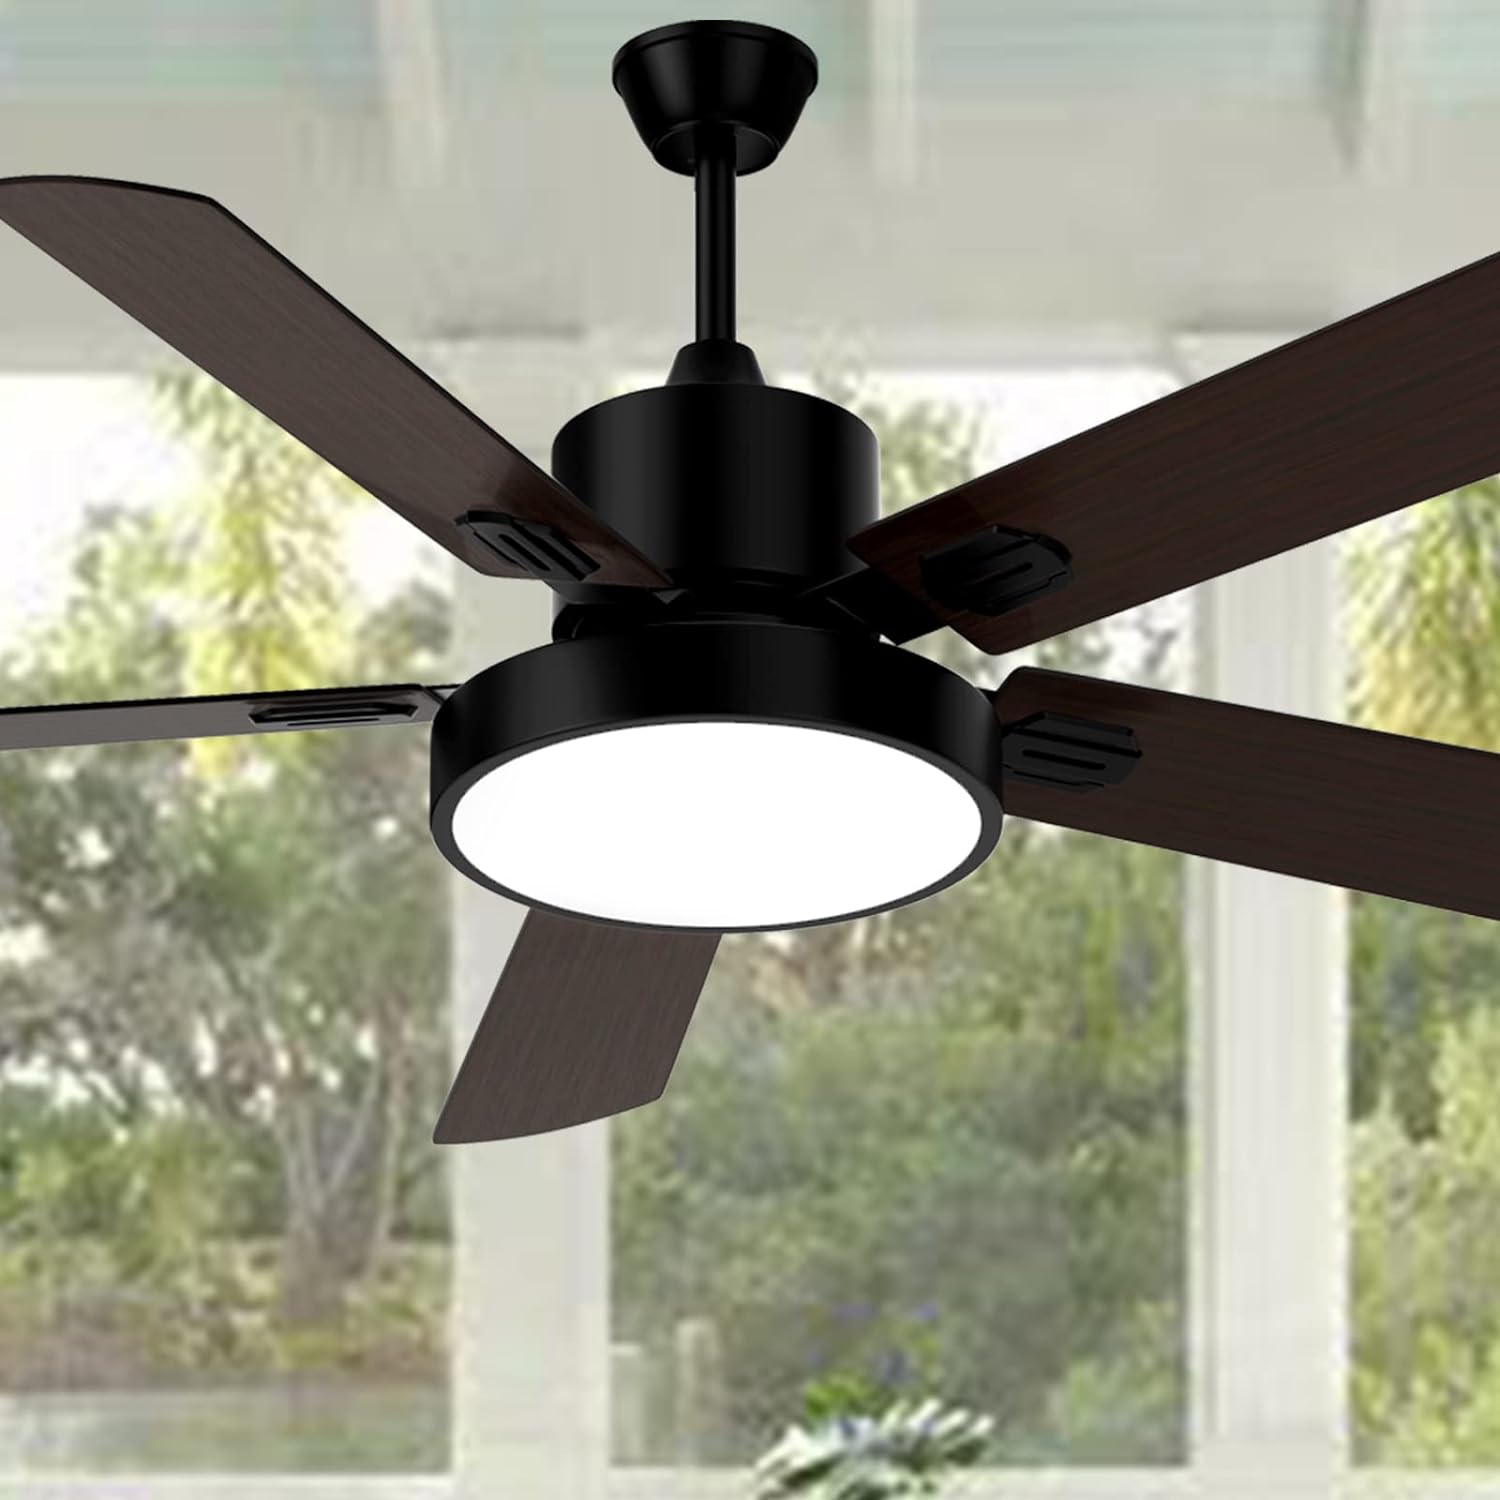 Ghicc 52-Inch Ceiling Fans with Lights, Black Ceiling Fan with Lights Remote Control- Reversible Silent DC Motor and Matte Blac